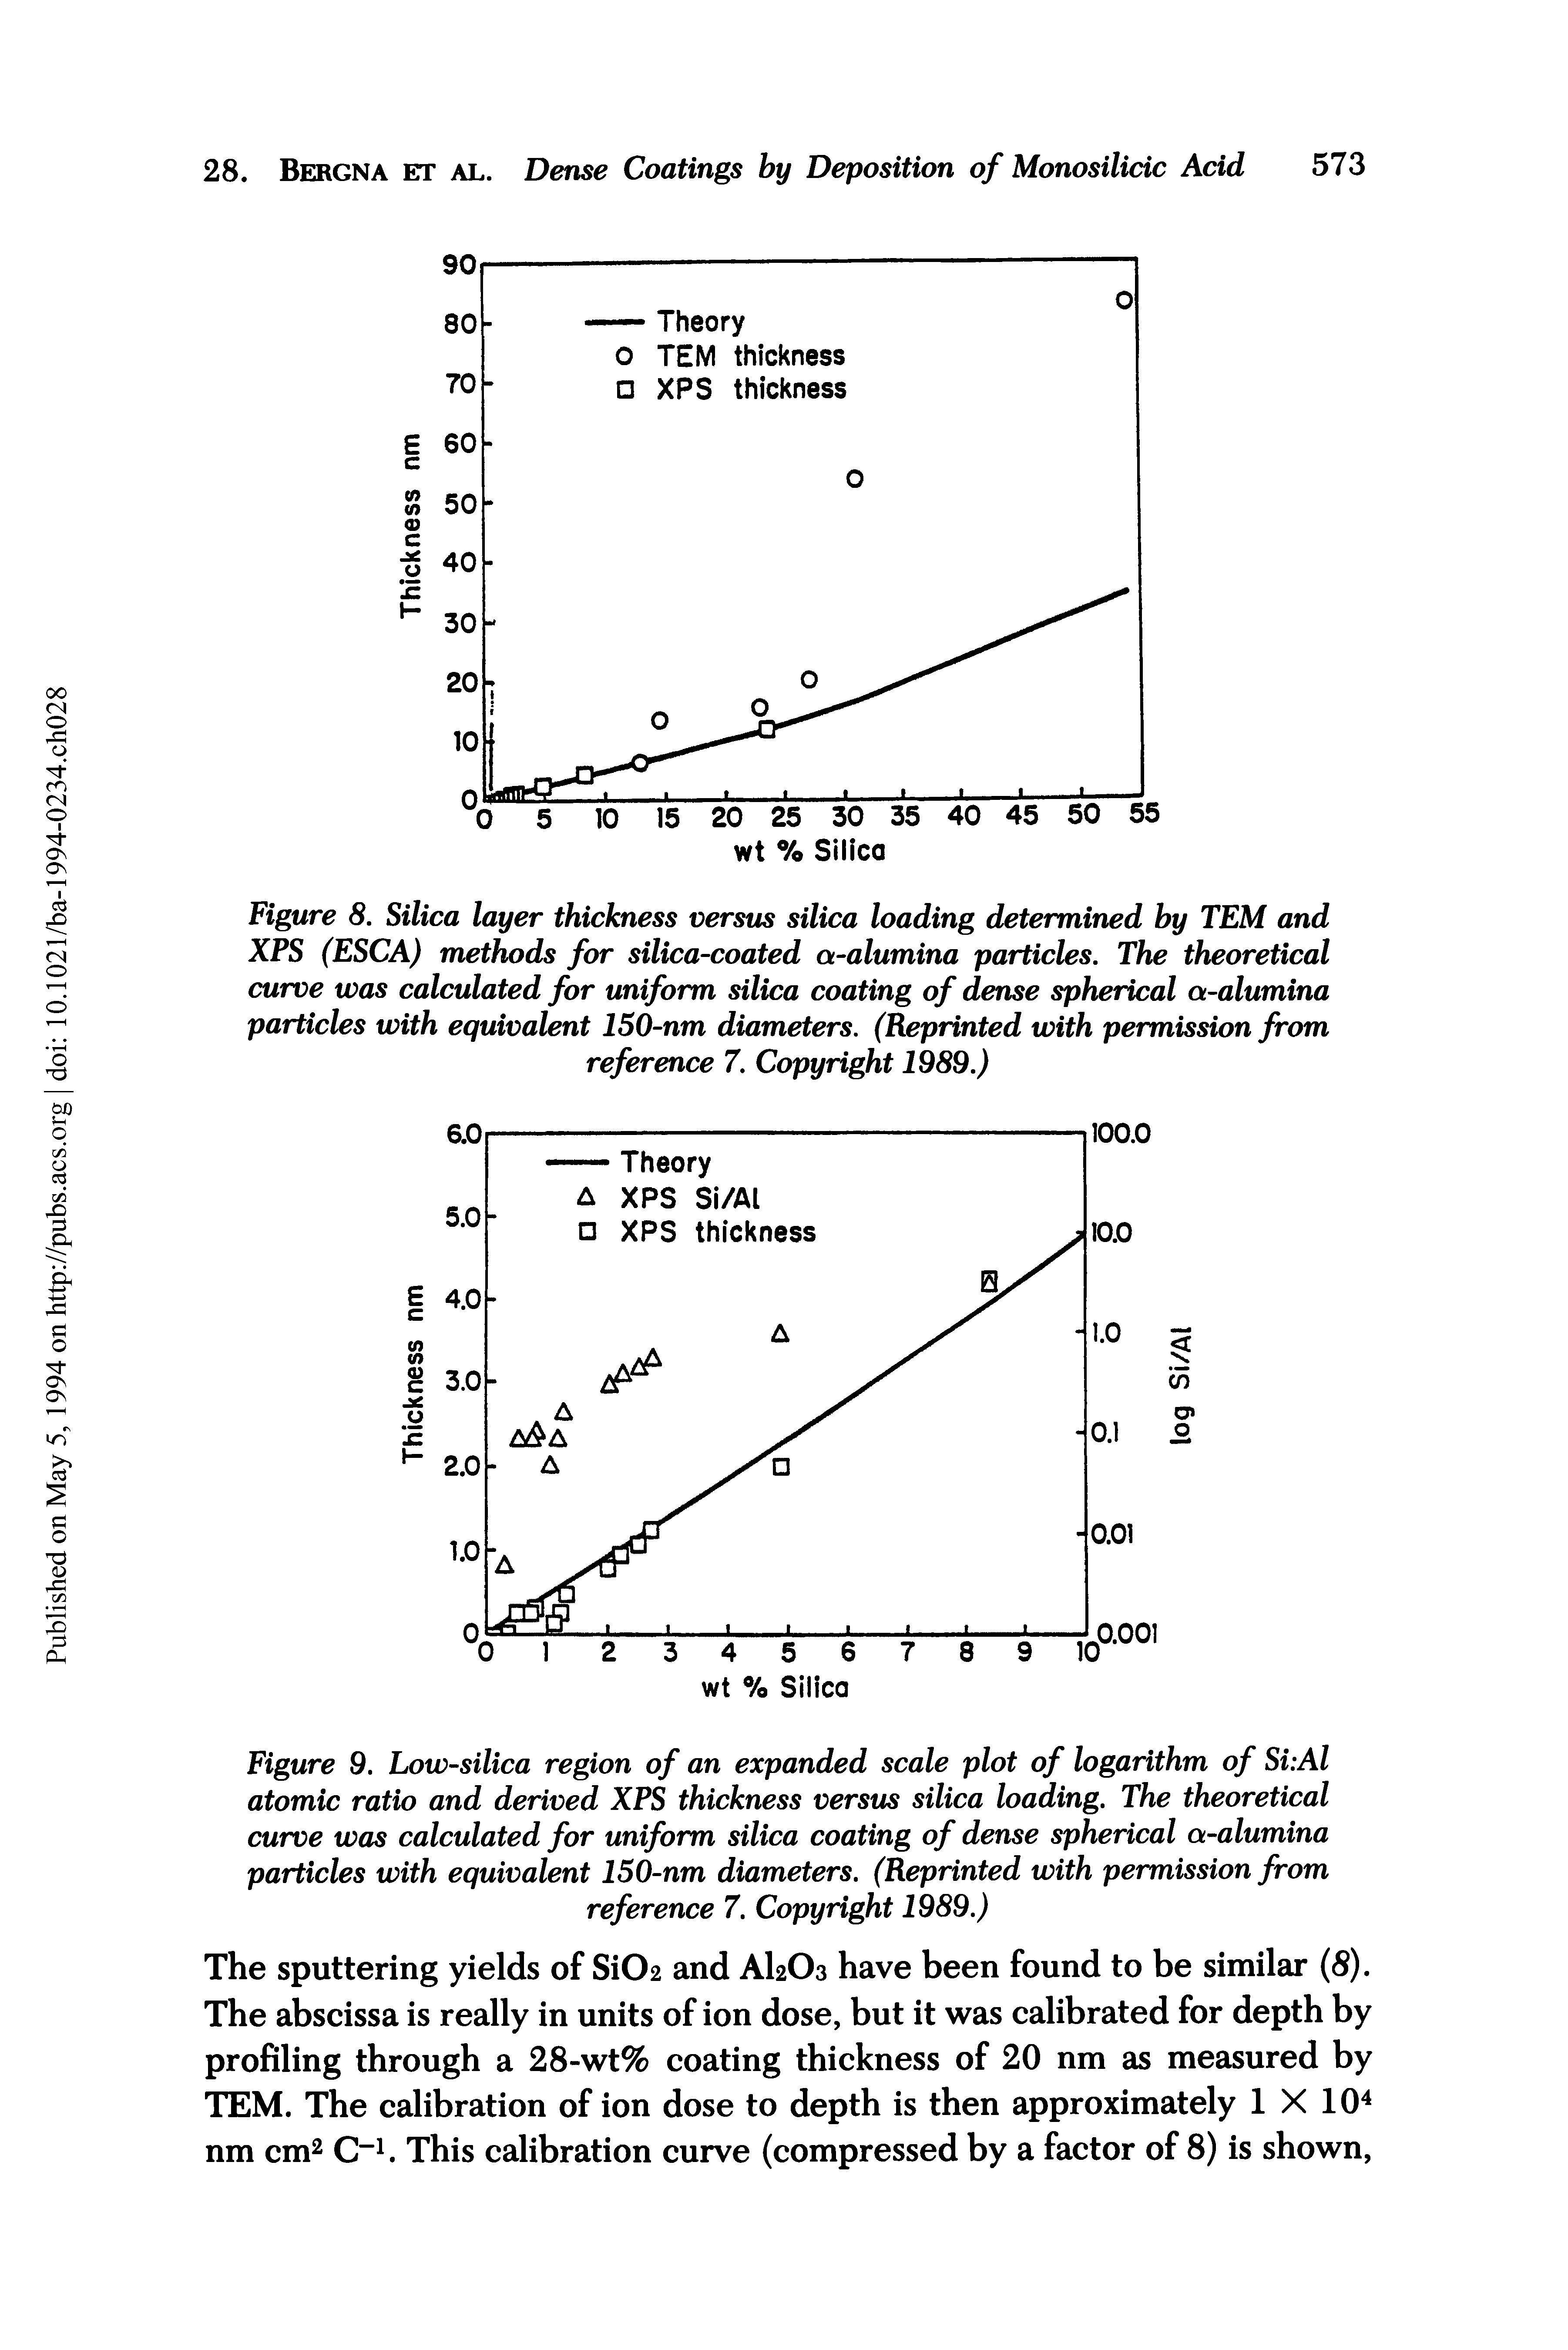 Figure 8. Silica layer thickness versus silica loading determined by TEM and XPS (ESCA) methods for silica-coated a-alumina particles. The theoretical curve was calculated for uniform silica coating of dense spherical a-alumina particles with equivalent 150-nm diameters. (Reprinted with permission from reference 7. Copyright 1989.)...